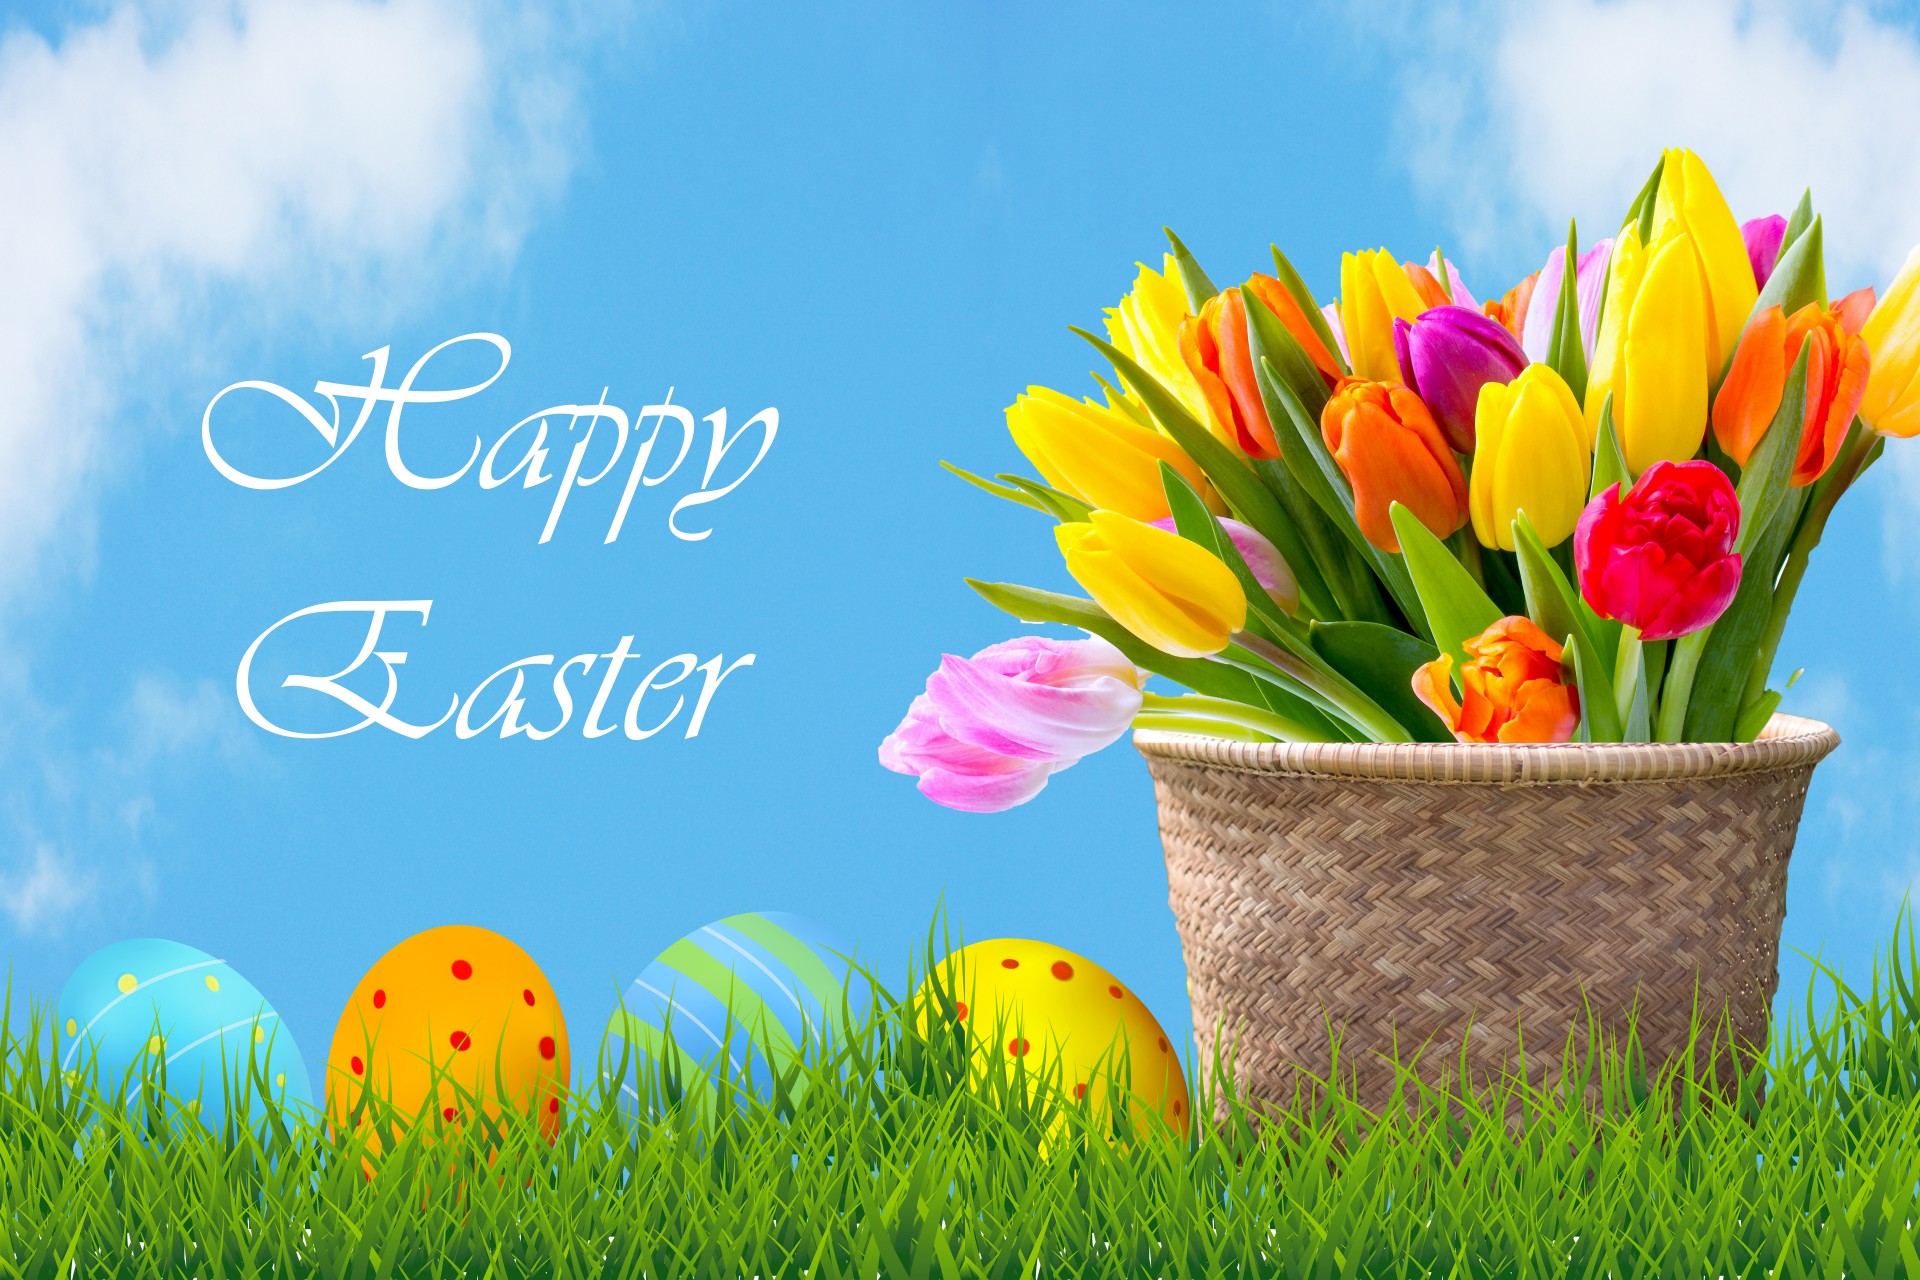 Beautiful Easter Image - Happy Easter Friday - HD Wallpaper 